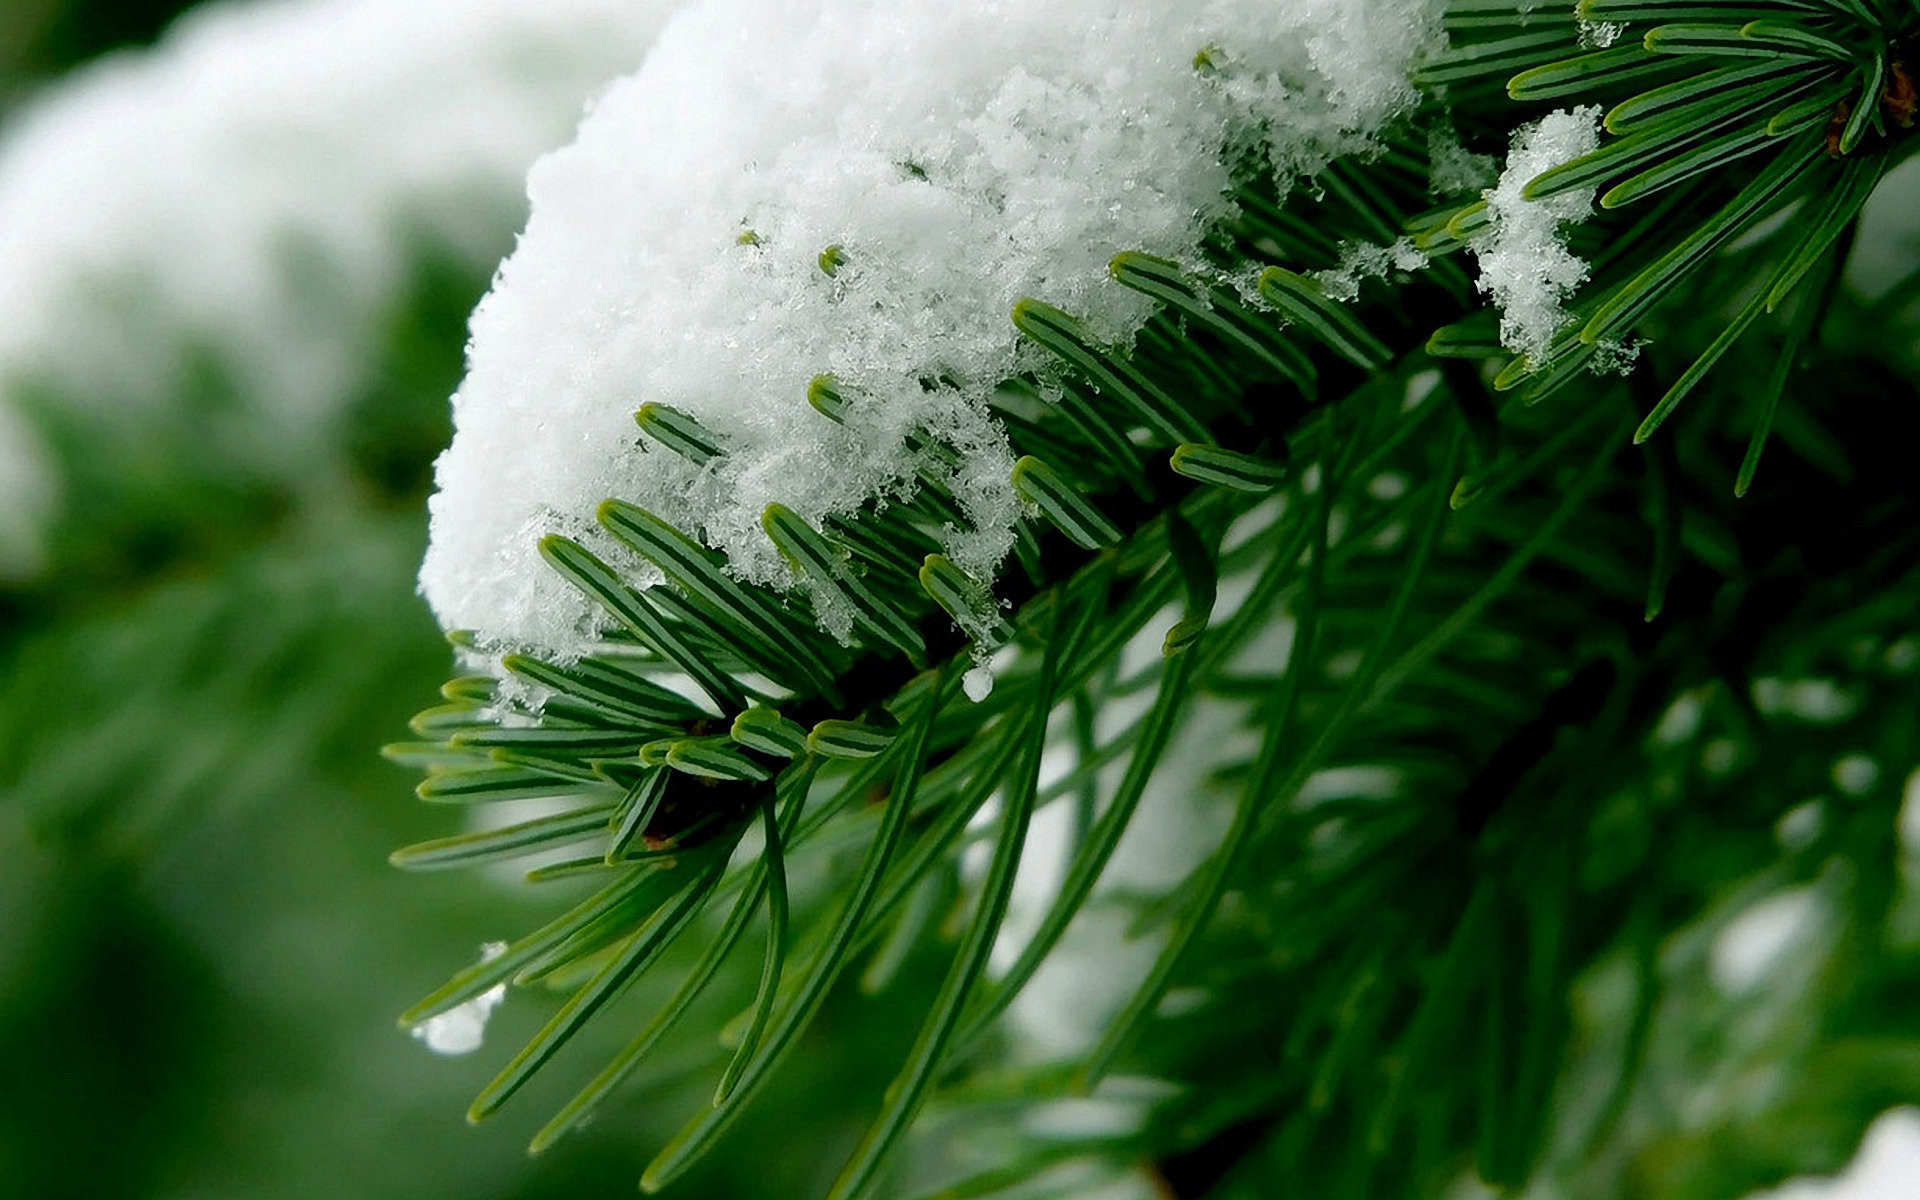 Landscape Images, Tree, Nature Wallpaper Tumblr,snow, - Snow On Pine Trees - HD Wallpaper 